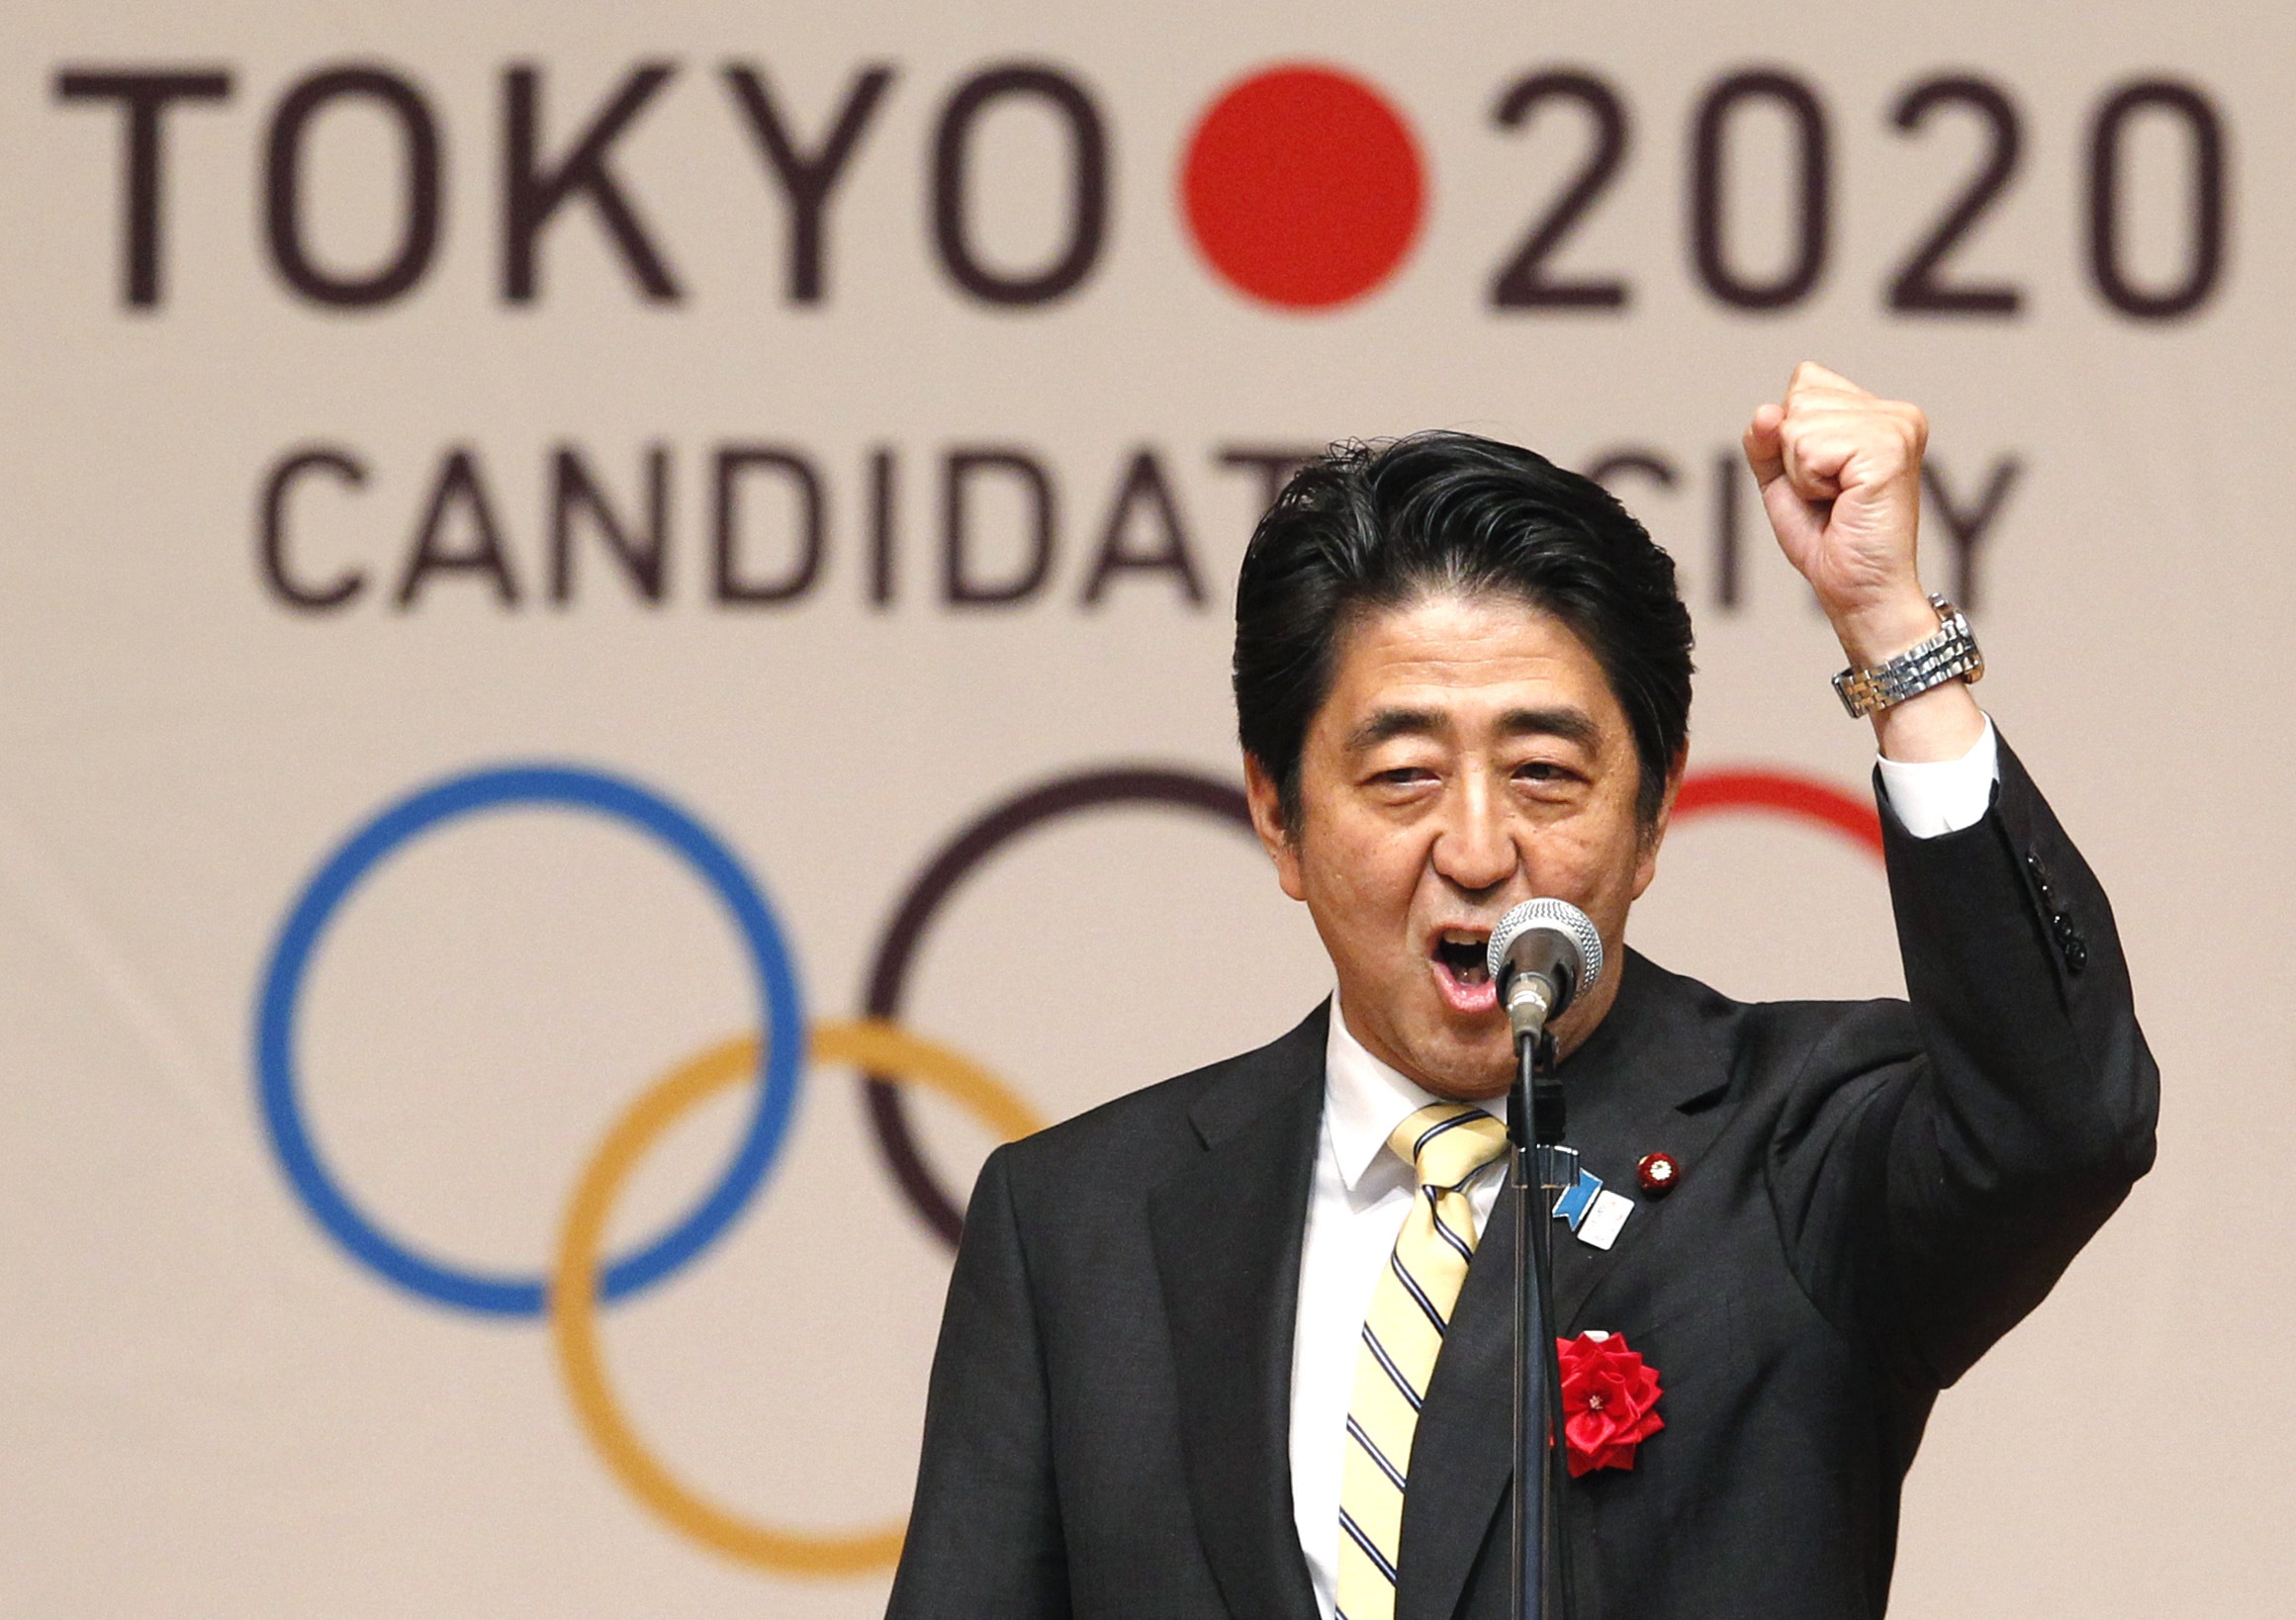 File photo of Japan's Prime Minister Shinzo Abe gesturing as he speaks during Tokyo 2020 kick off rally in Tokyo